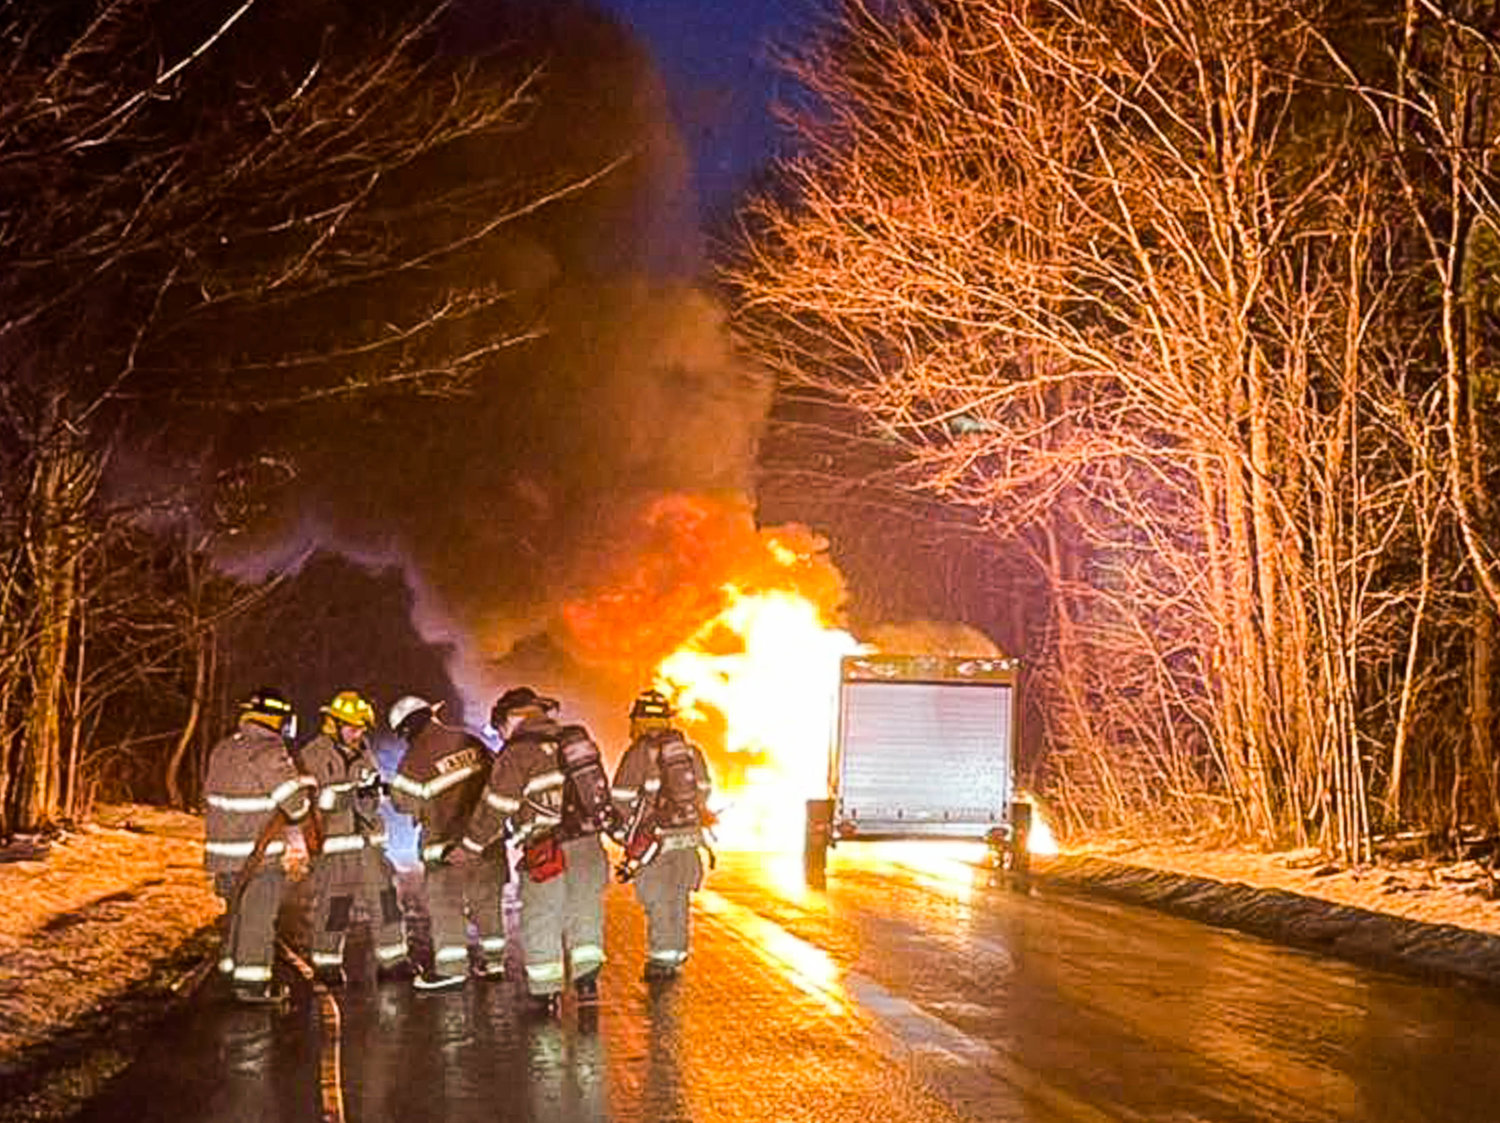 Western firefighters work to douse a fully involved pickup truck fire on North Steuben Road in Steuben Sunday evening. No one was injured.